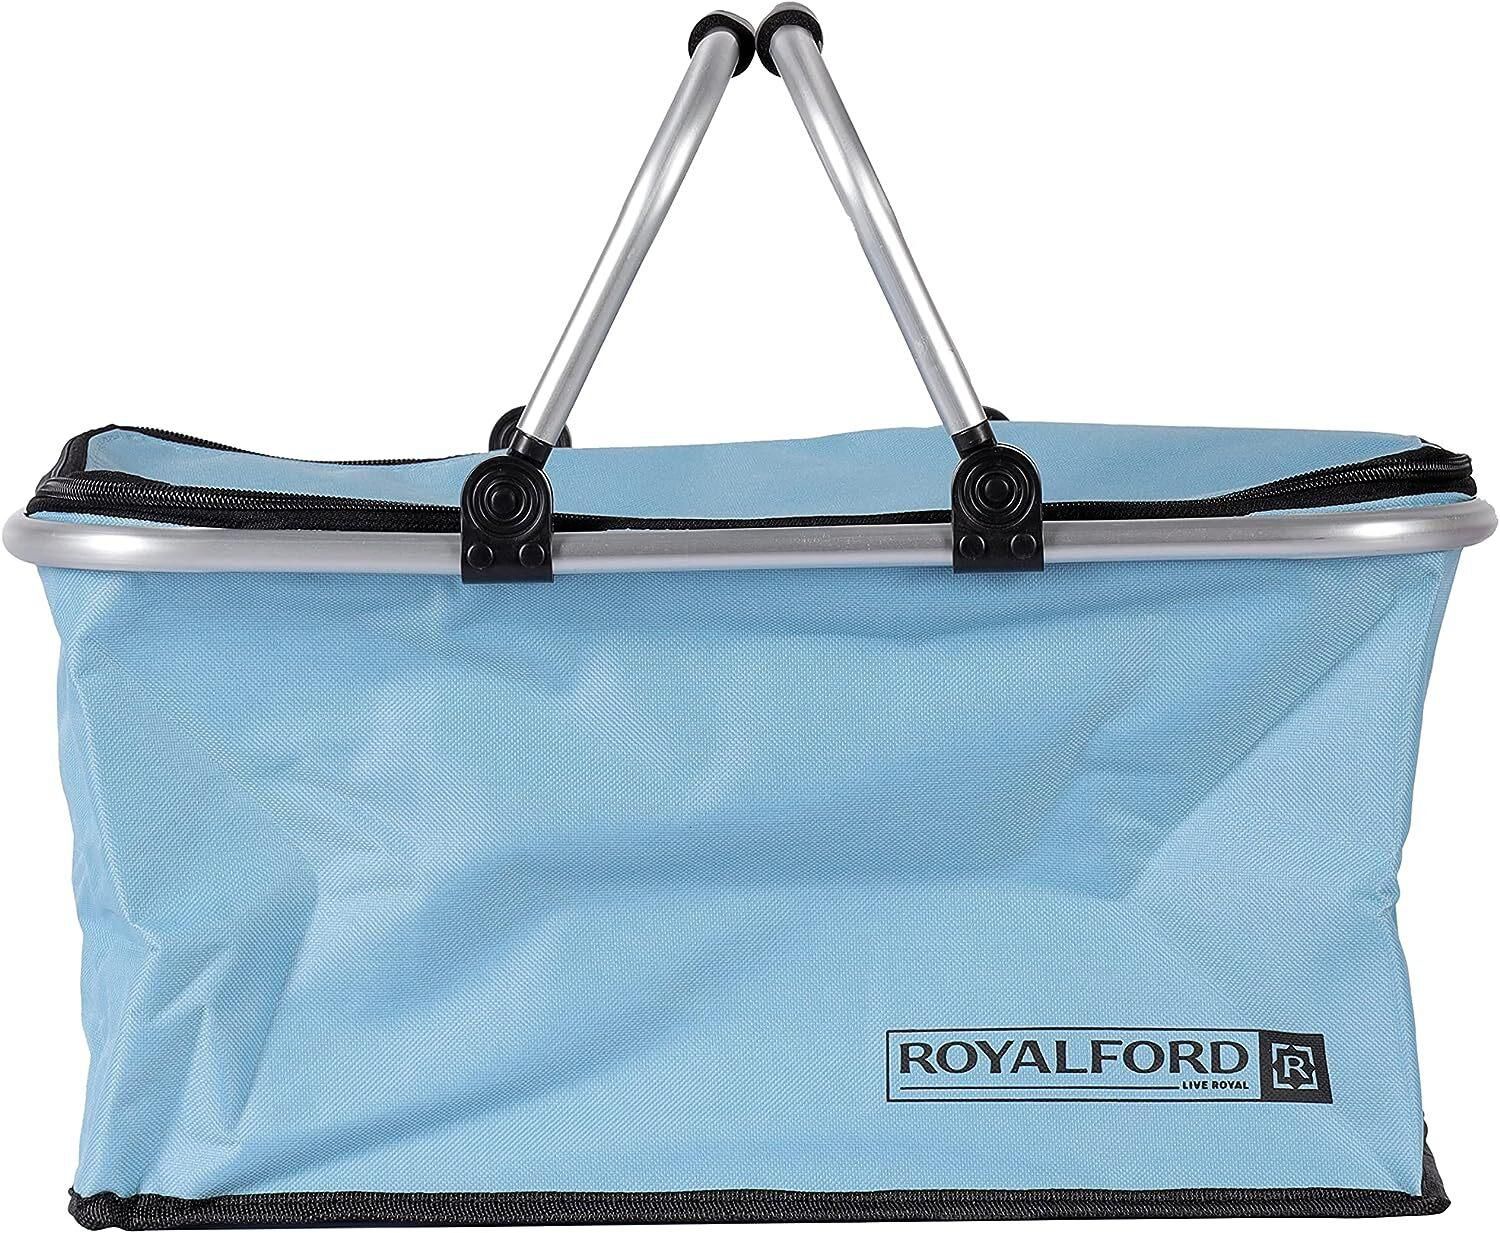 Royalford 30L Insulated Picnic And Grocery Basket- Rf11375 Multi-Purpose Utility Basket With Aluminum Handle And Lid Break-Resistant, Light-Weight, Stylish Construction Blue